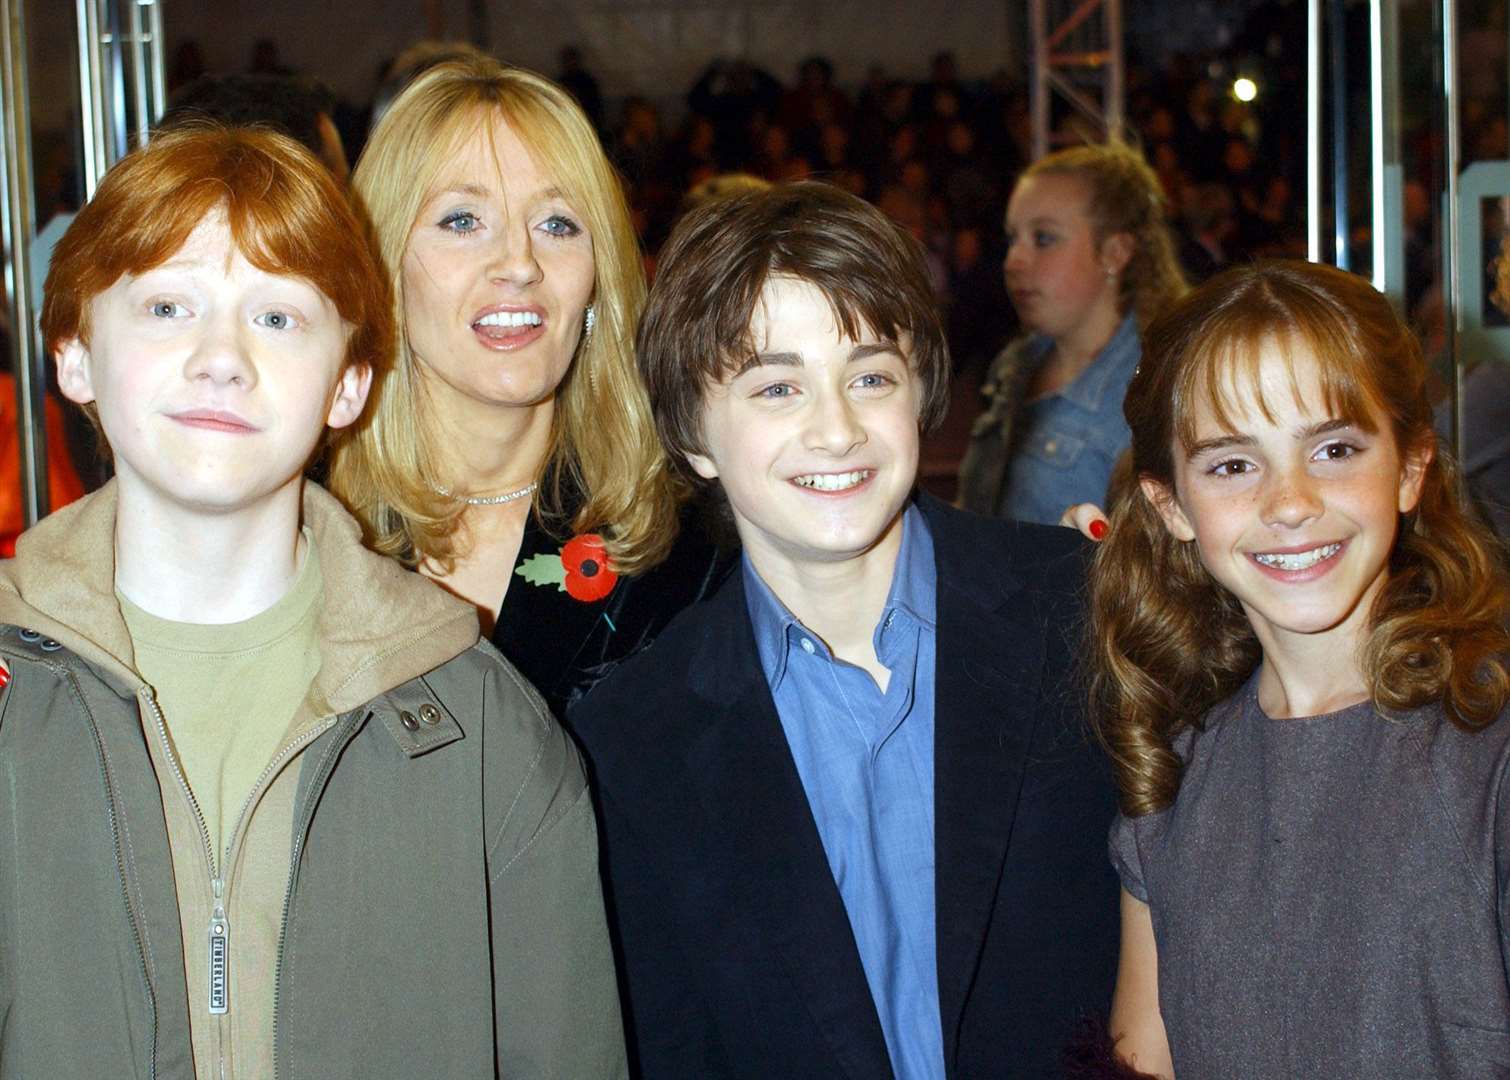 The stars of the film, Rupert Grint, Daniel Radcliffe and Emma Watson, with author JK Rowling at the world premiere of Harry Potter and the Philosopher's Stone at the Odeon Leicester Square in London on Sunday, November 4 2001 - exactly 20 years ago today. PA photo: William Conran